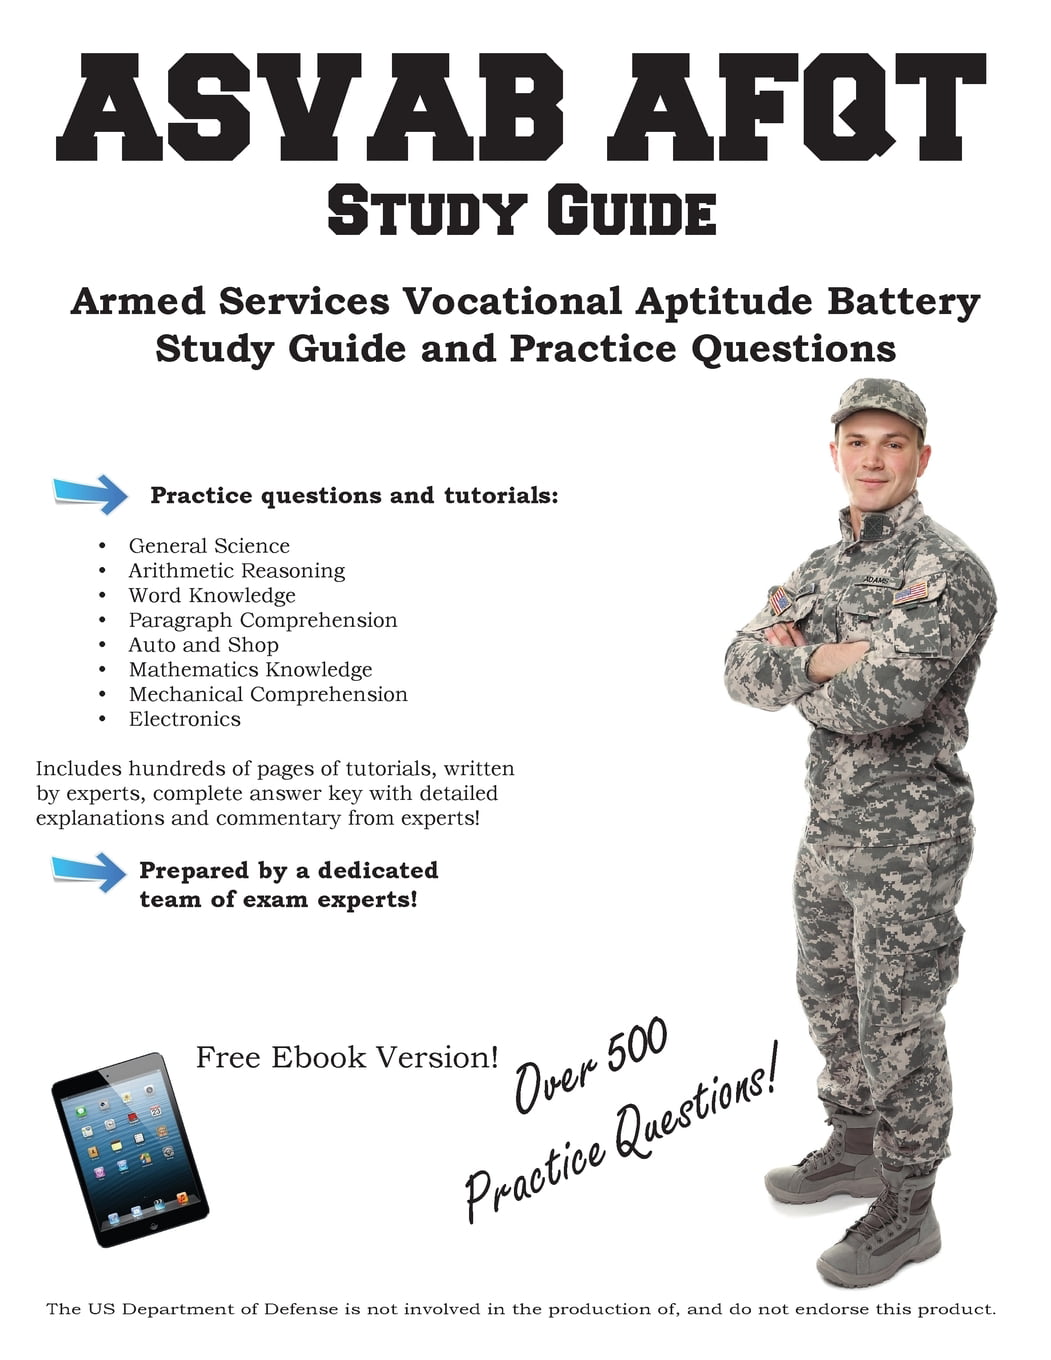 asvab-armed-services-vocational-aptitude-battery-study-guide-study-poster